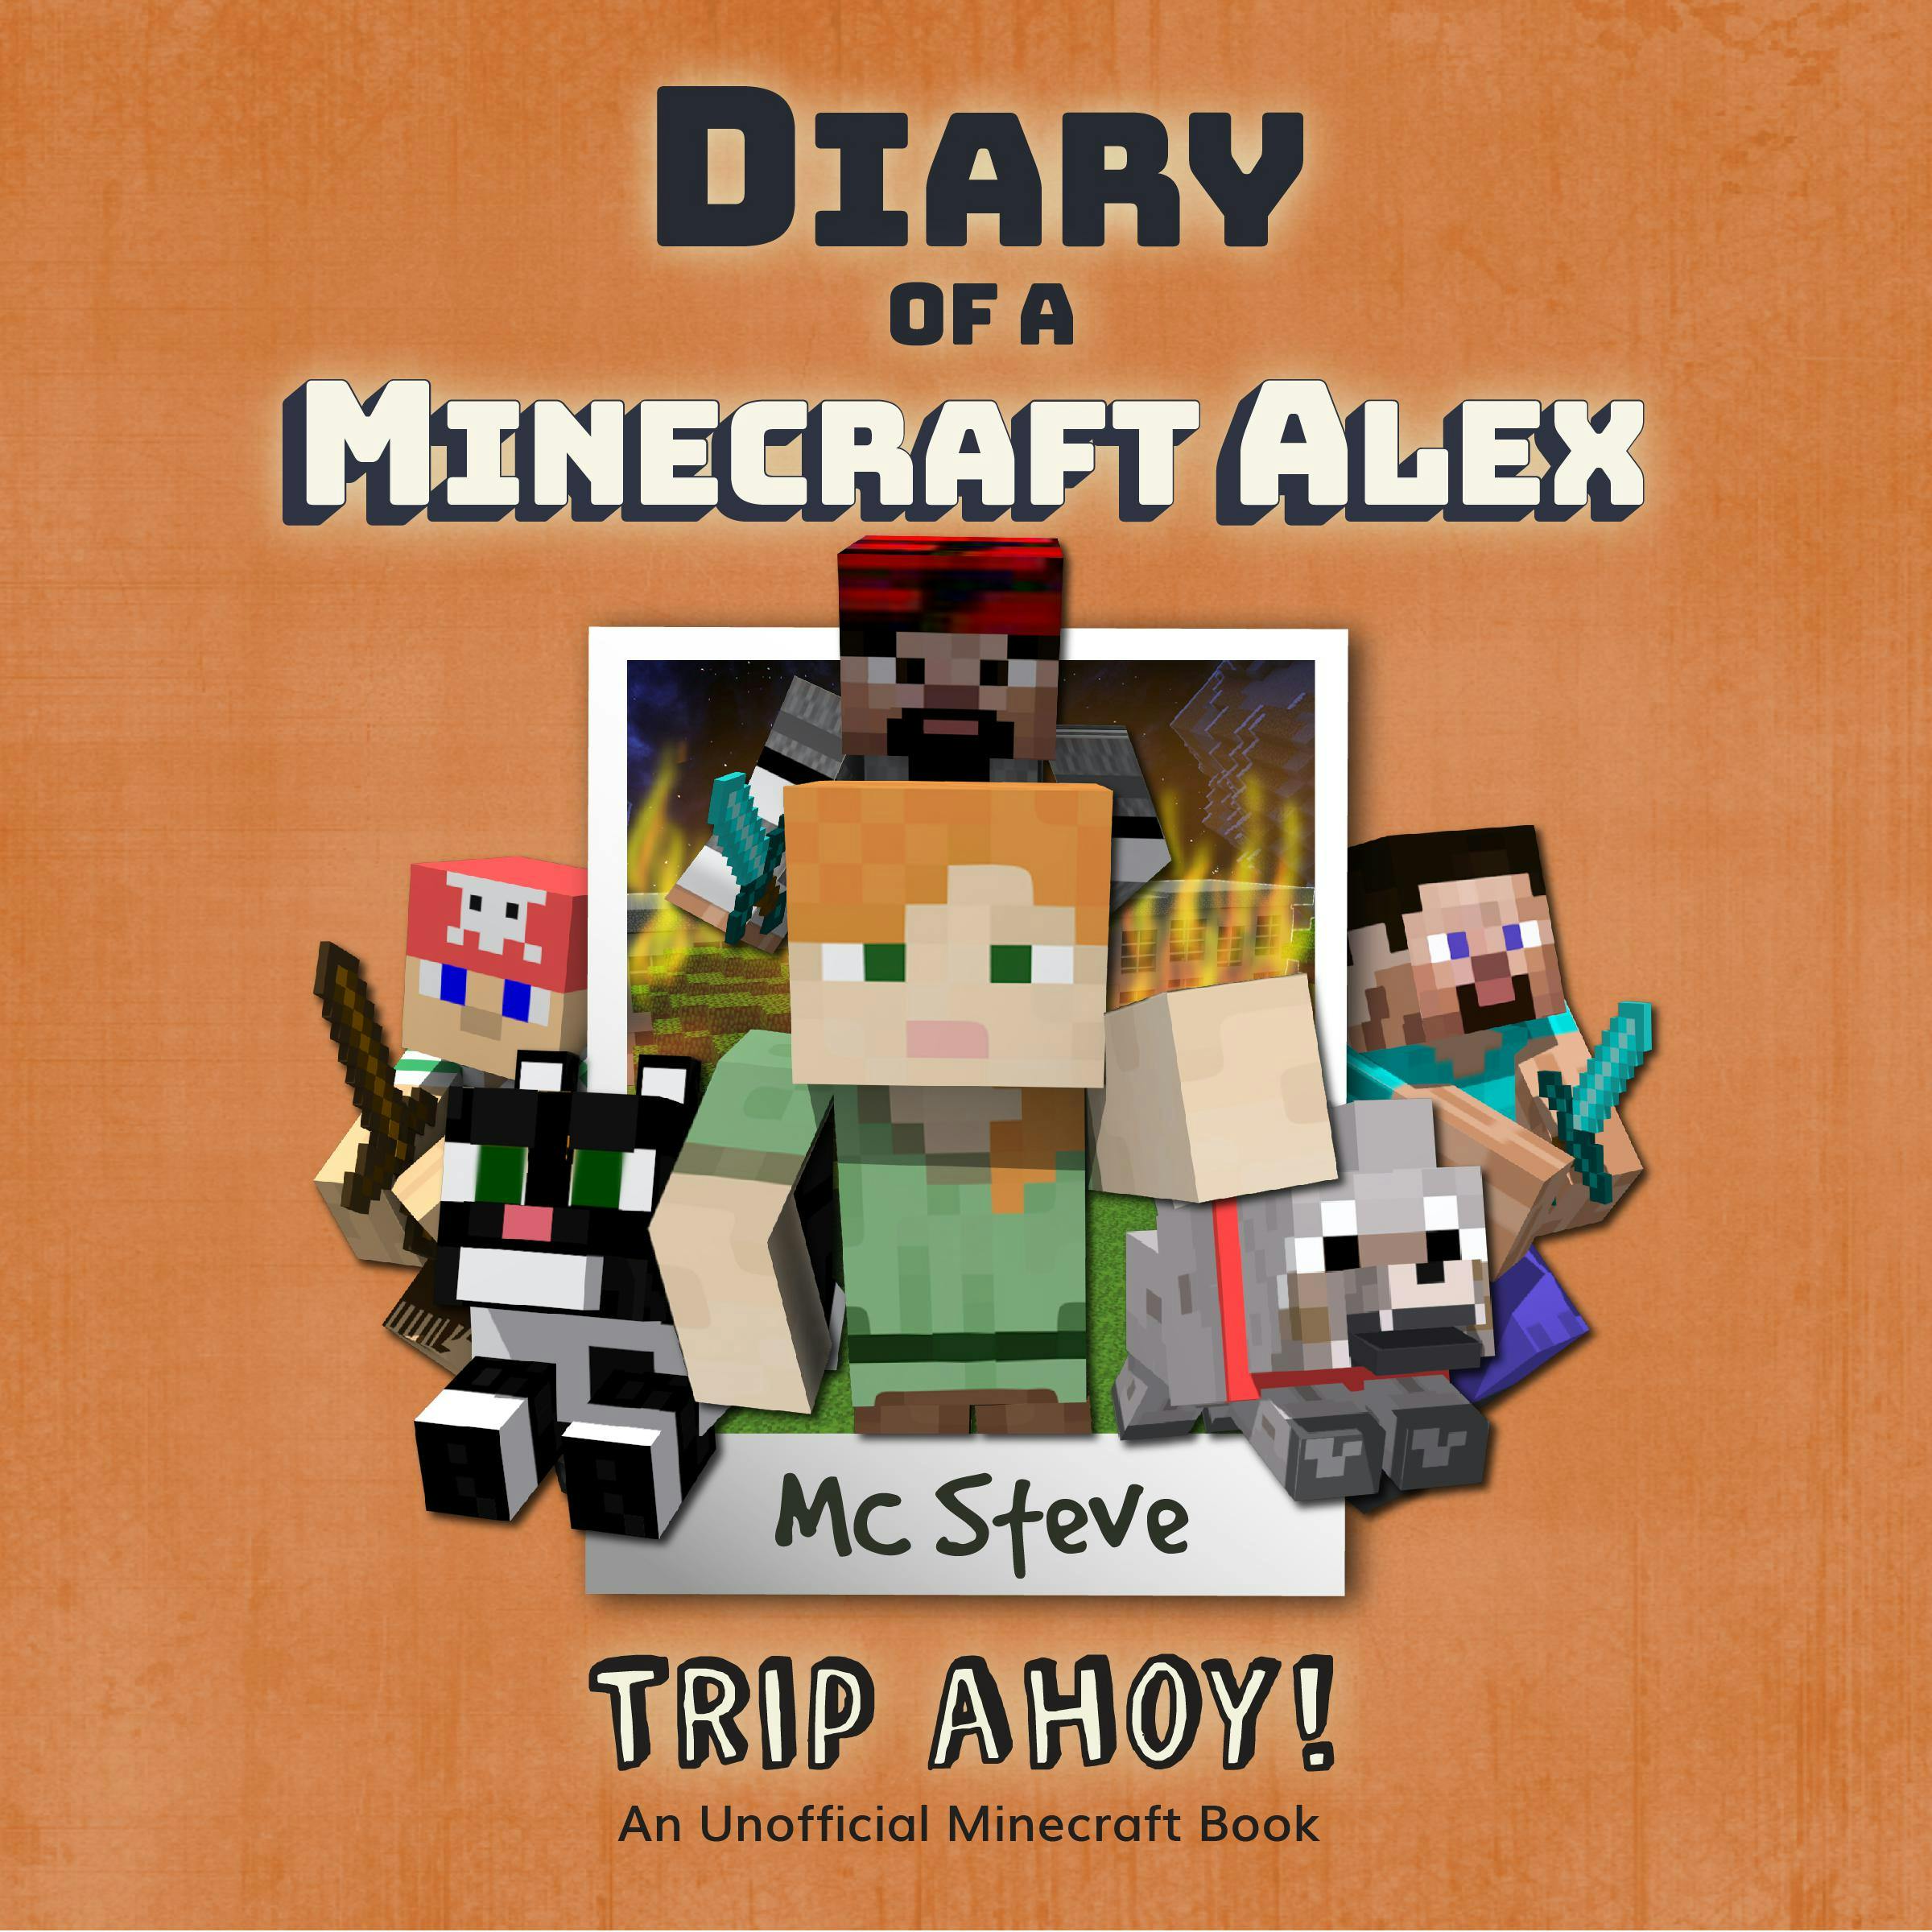 Diary Of A Minecraft Alex Book 6 - Trip Ahoy!: An Unofficial Minecraft Book - undefined